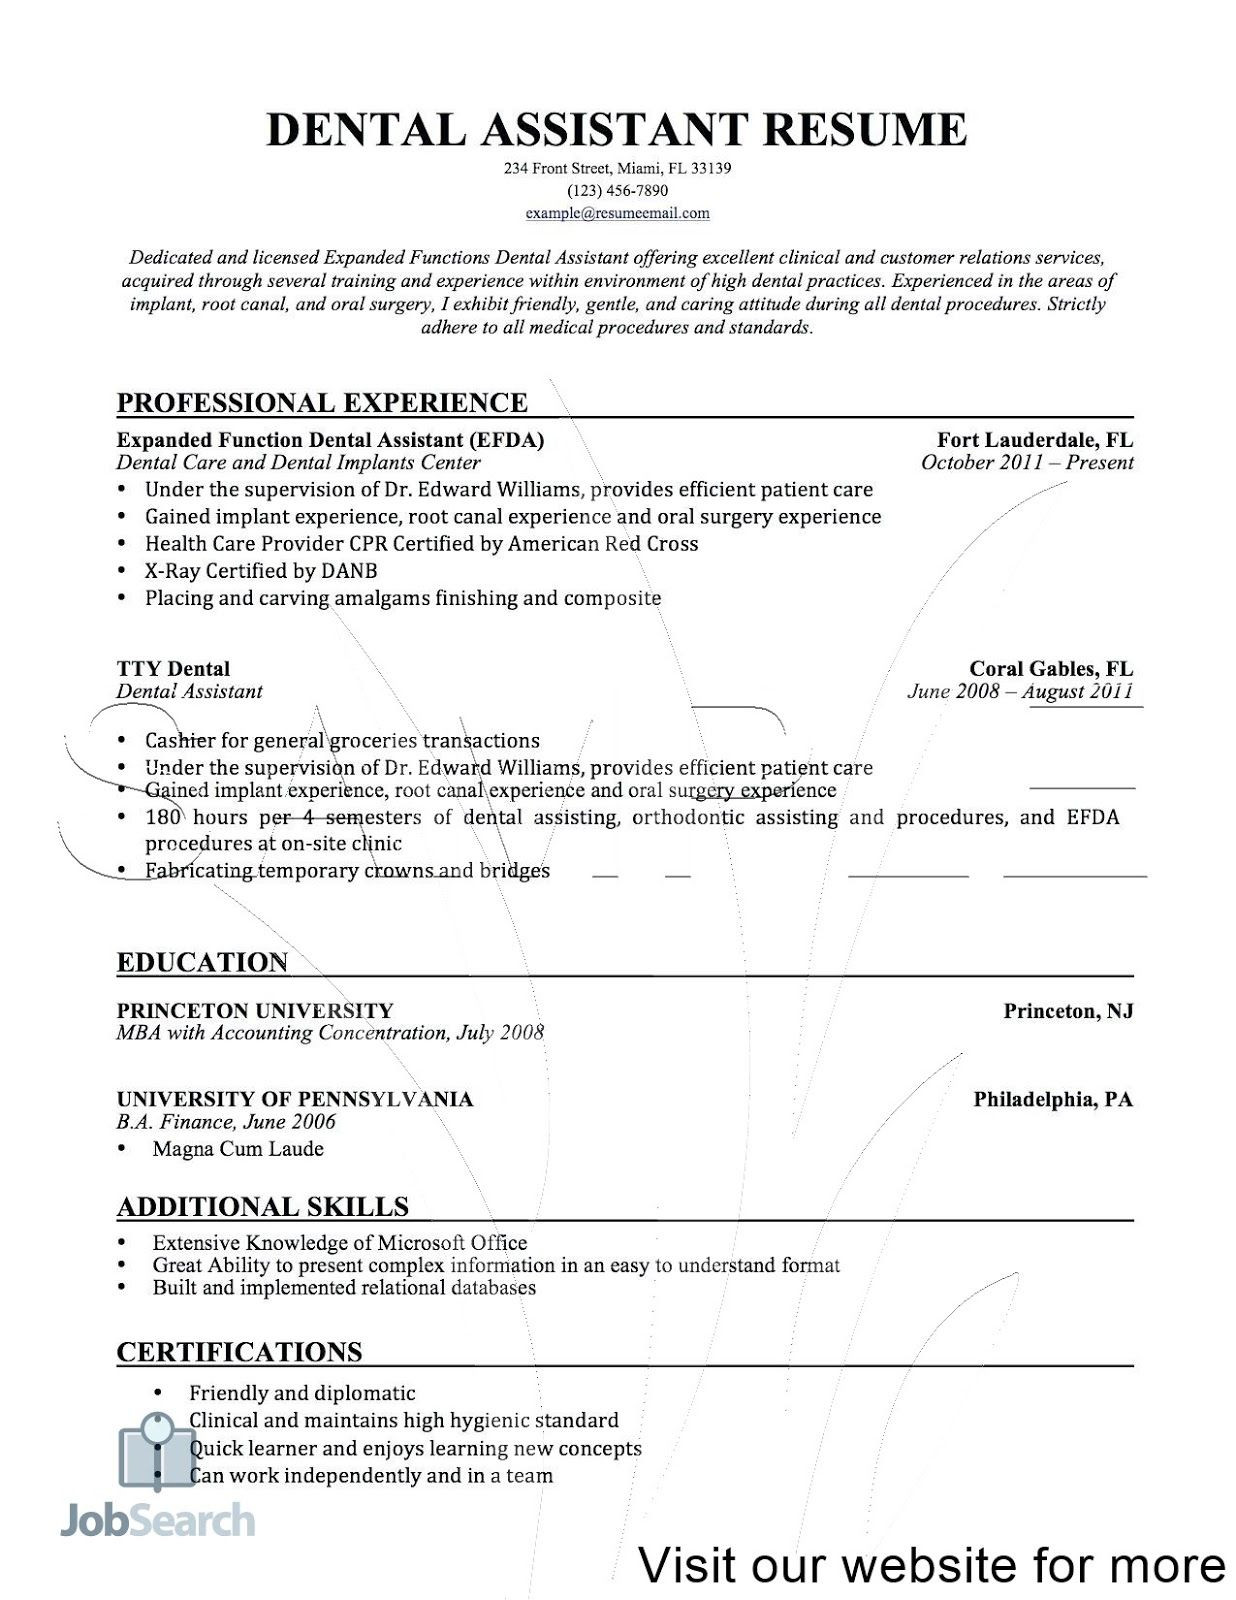 Sample Resume for Dental assistant with No Experience Dental assistant Resume Professional Experience Dental assistant …